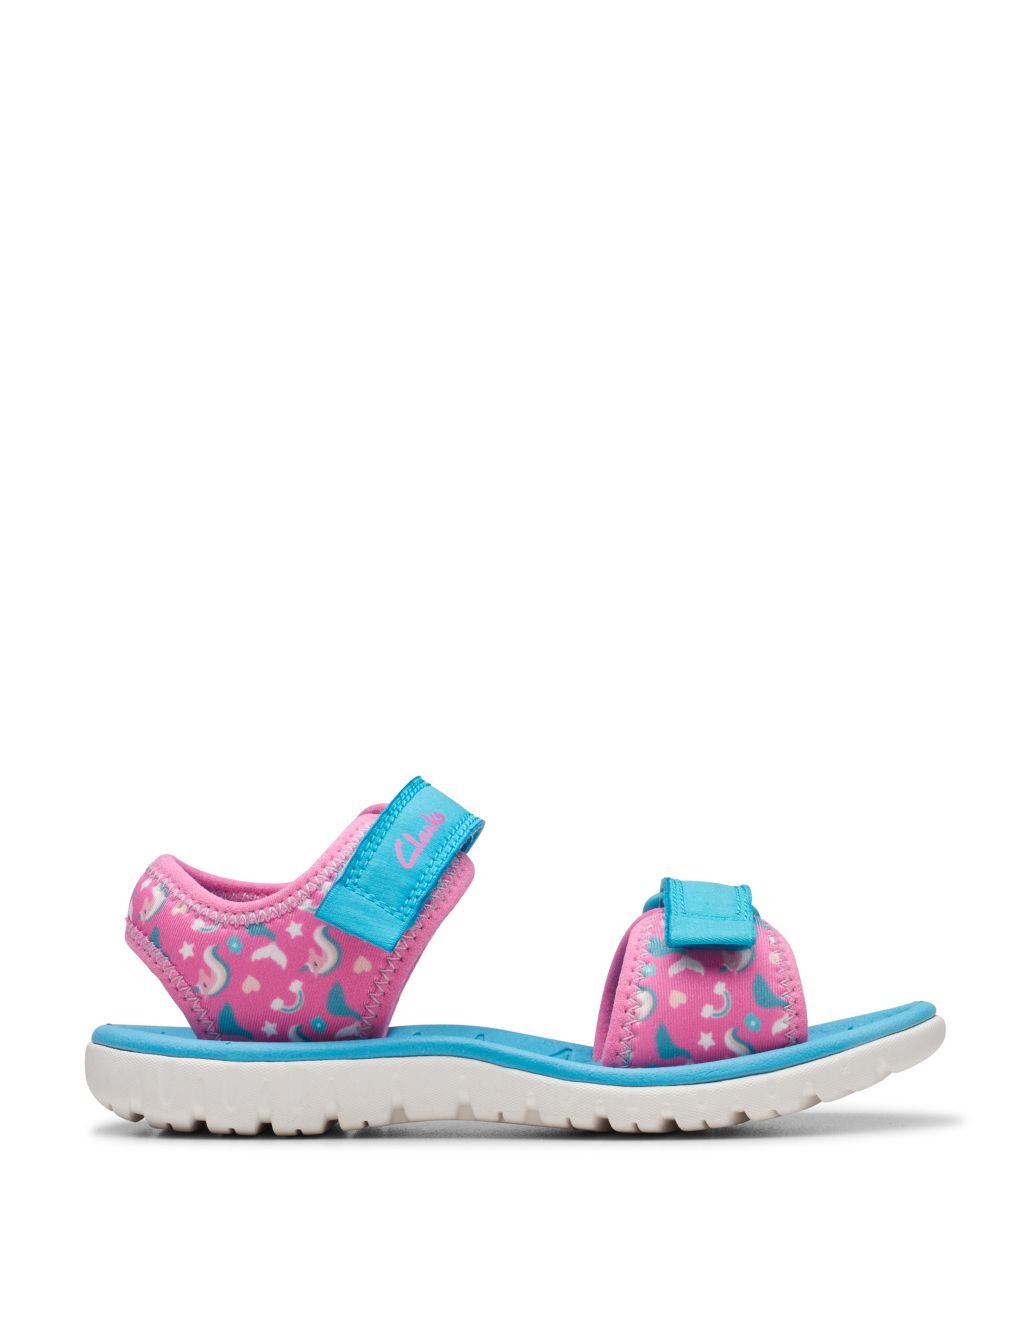 Kids' Patterned Riptape Sandals (7 Small - 12.5 Small)